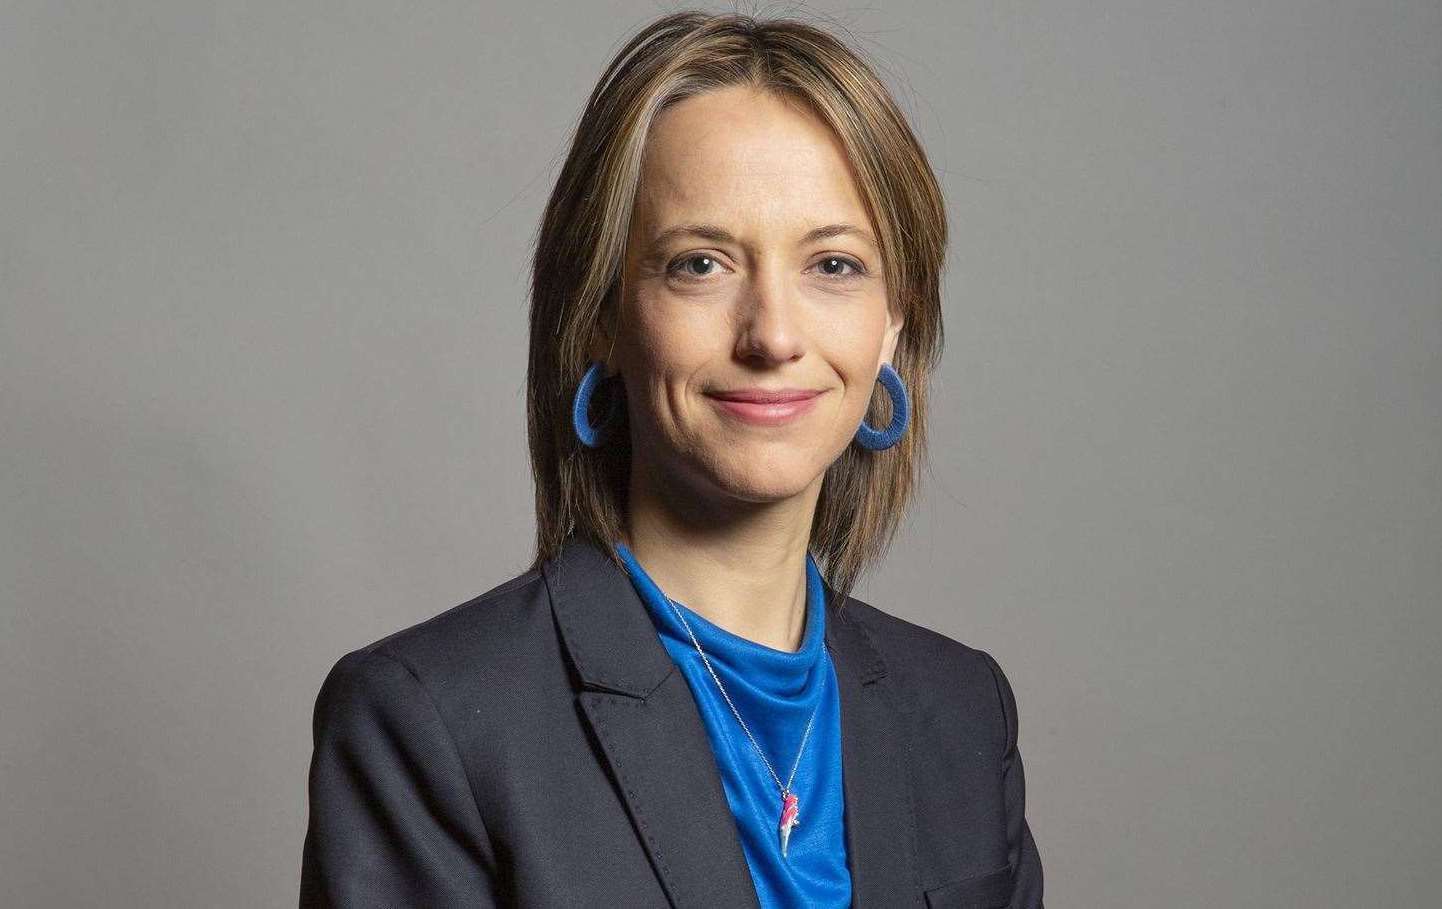 Faversham and Mid Kent MP Helen Whately